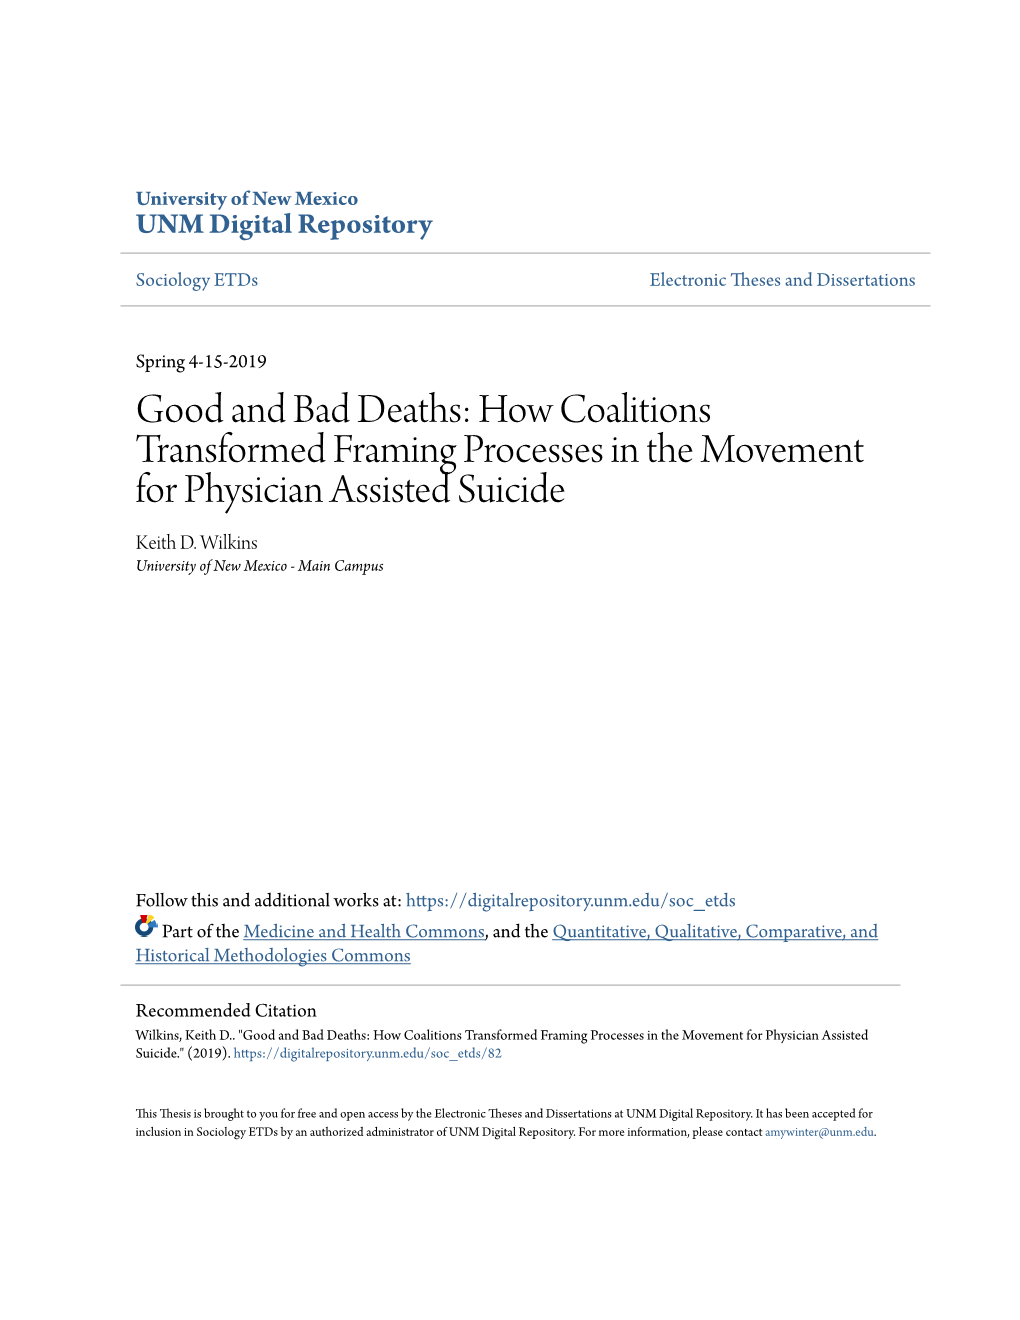 Good and Bad Deaths: How Coalitions Transformed Framing Processes in the Movement for Physician Assisted Suicide Keith D